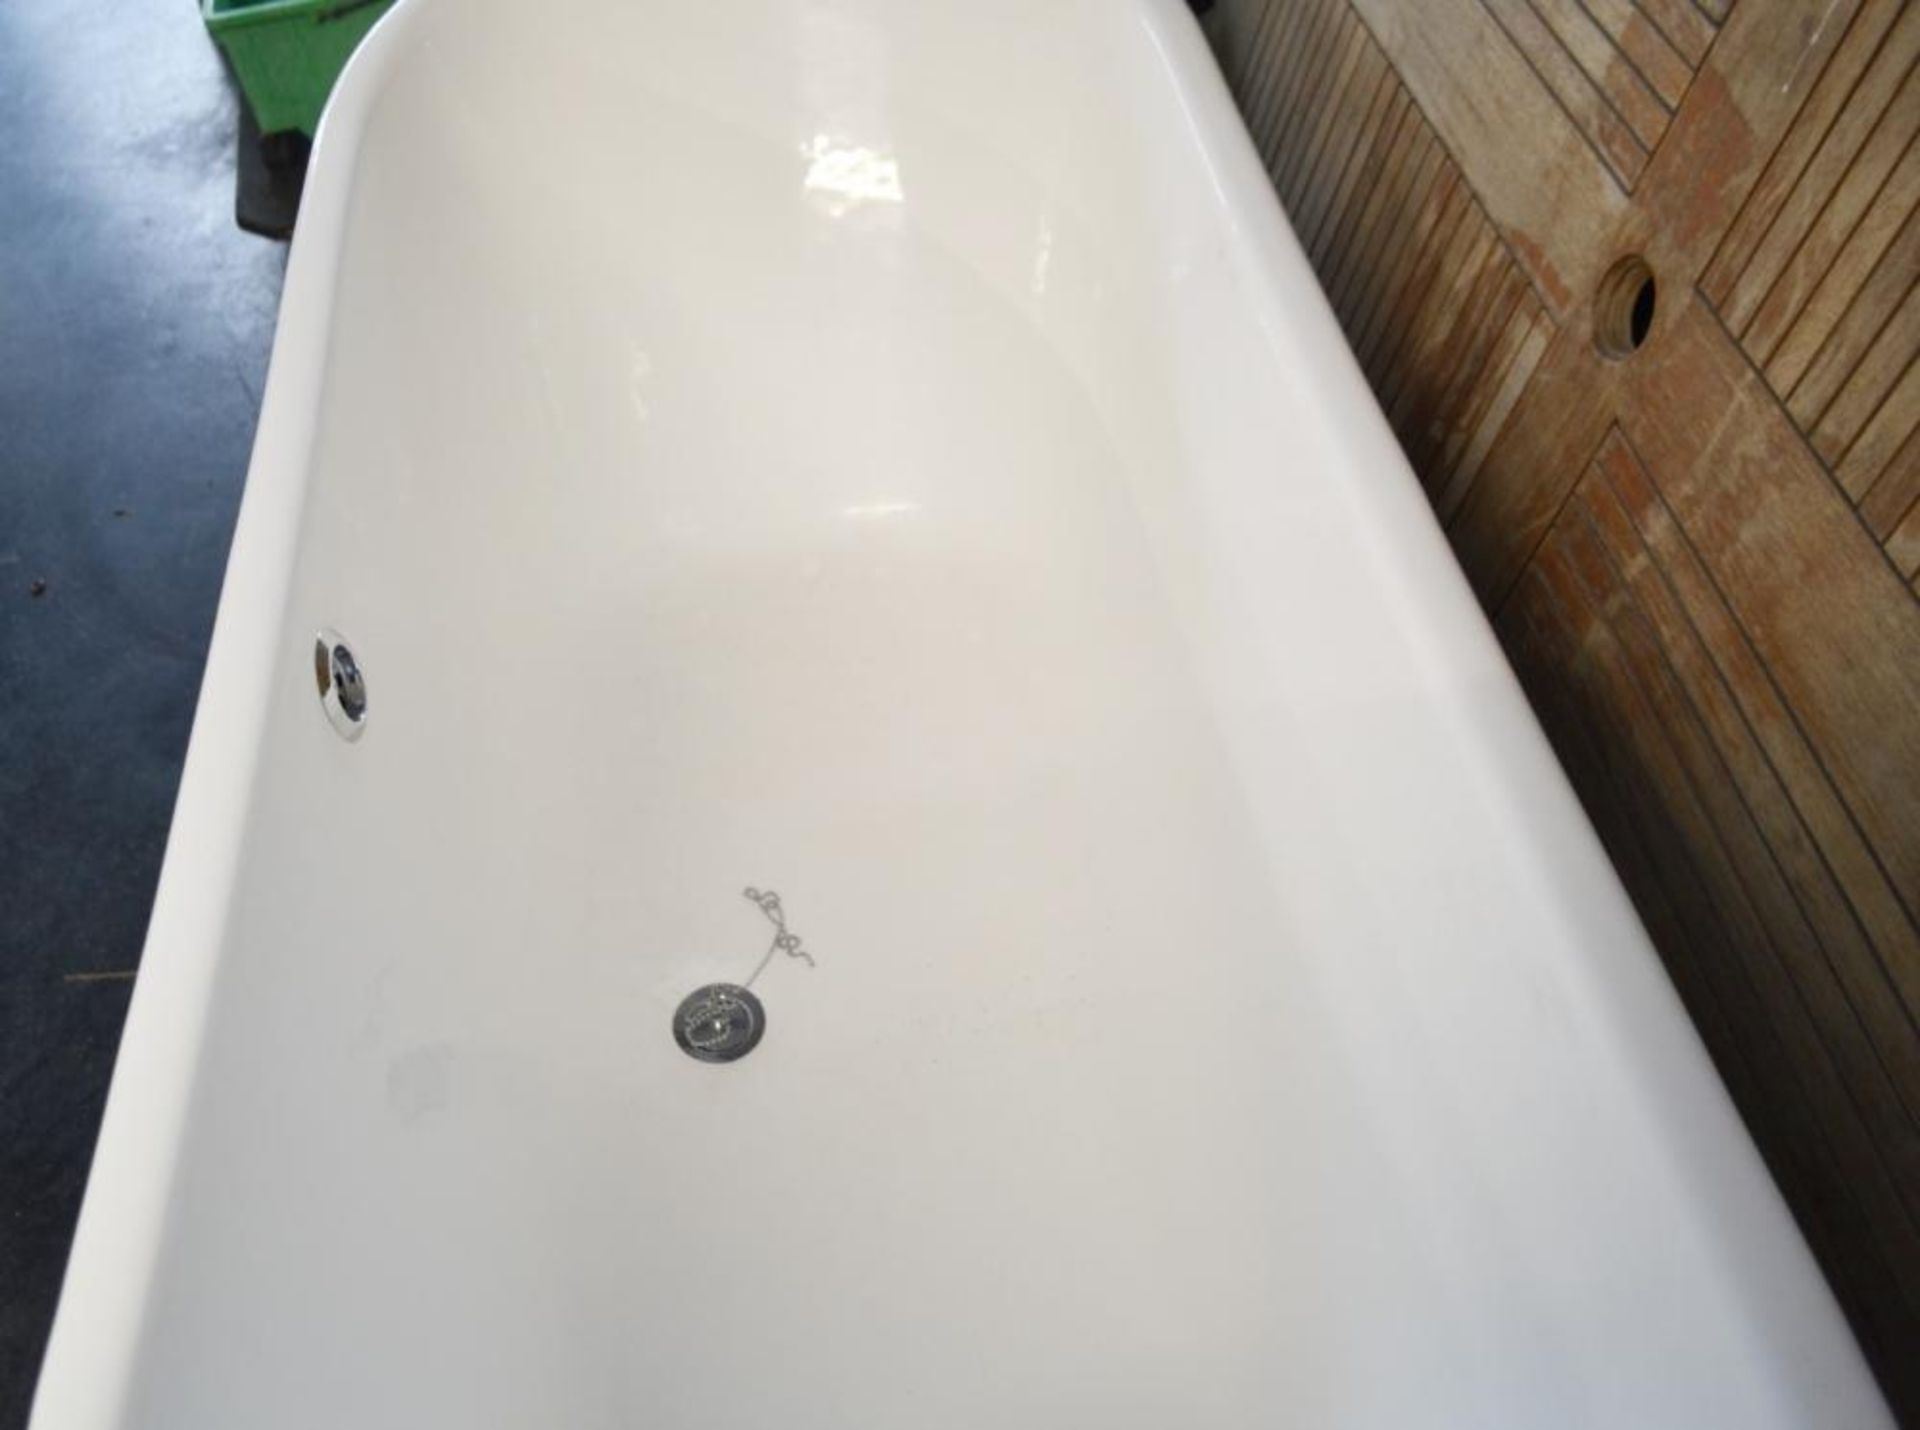 1 x Cast Iron Bath With Stainless Steel Exterior - CL439 - Location: Ilkley LS29 - Used In Good Cond - Image 6 of 8